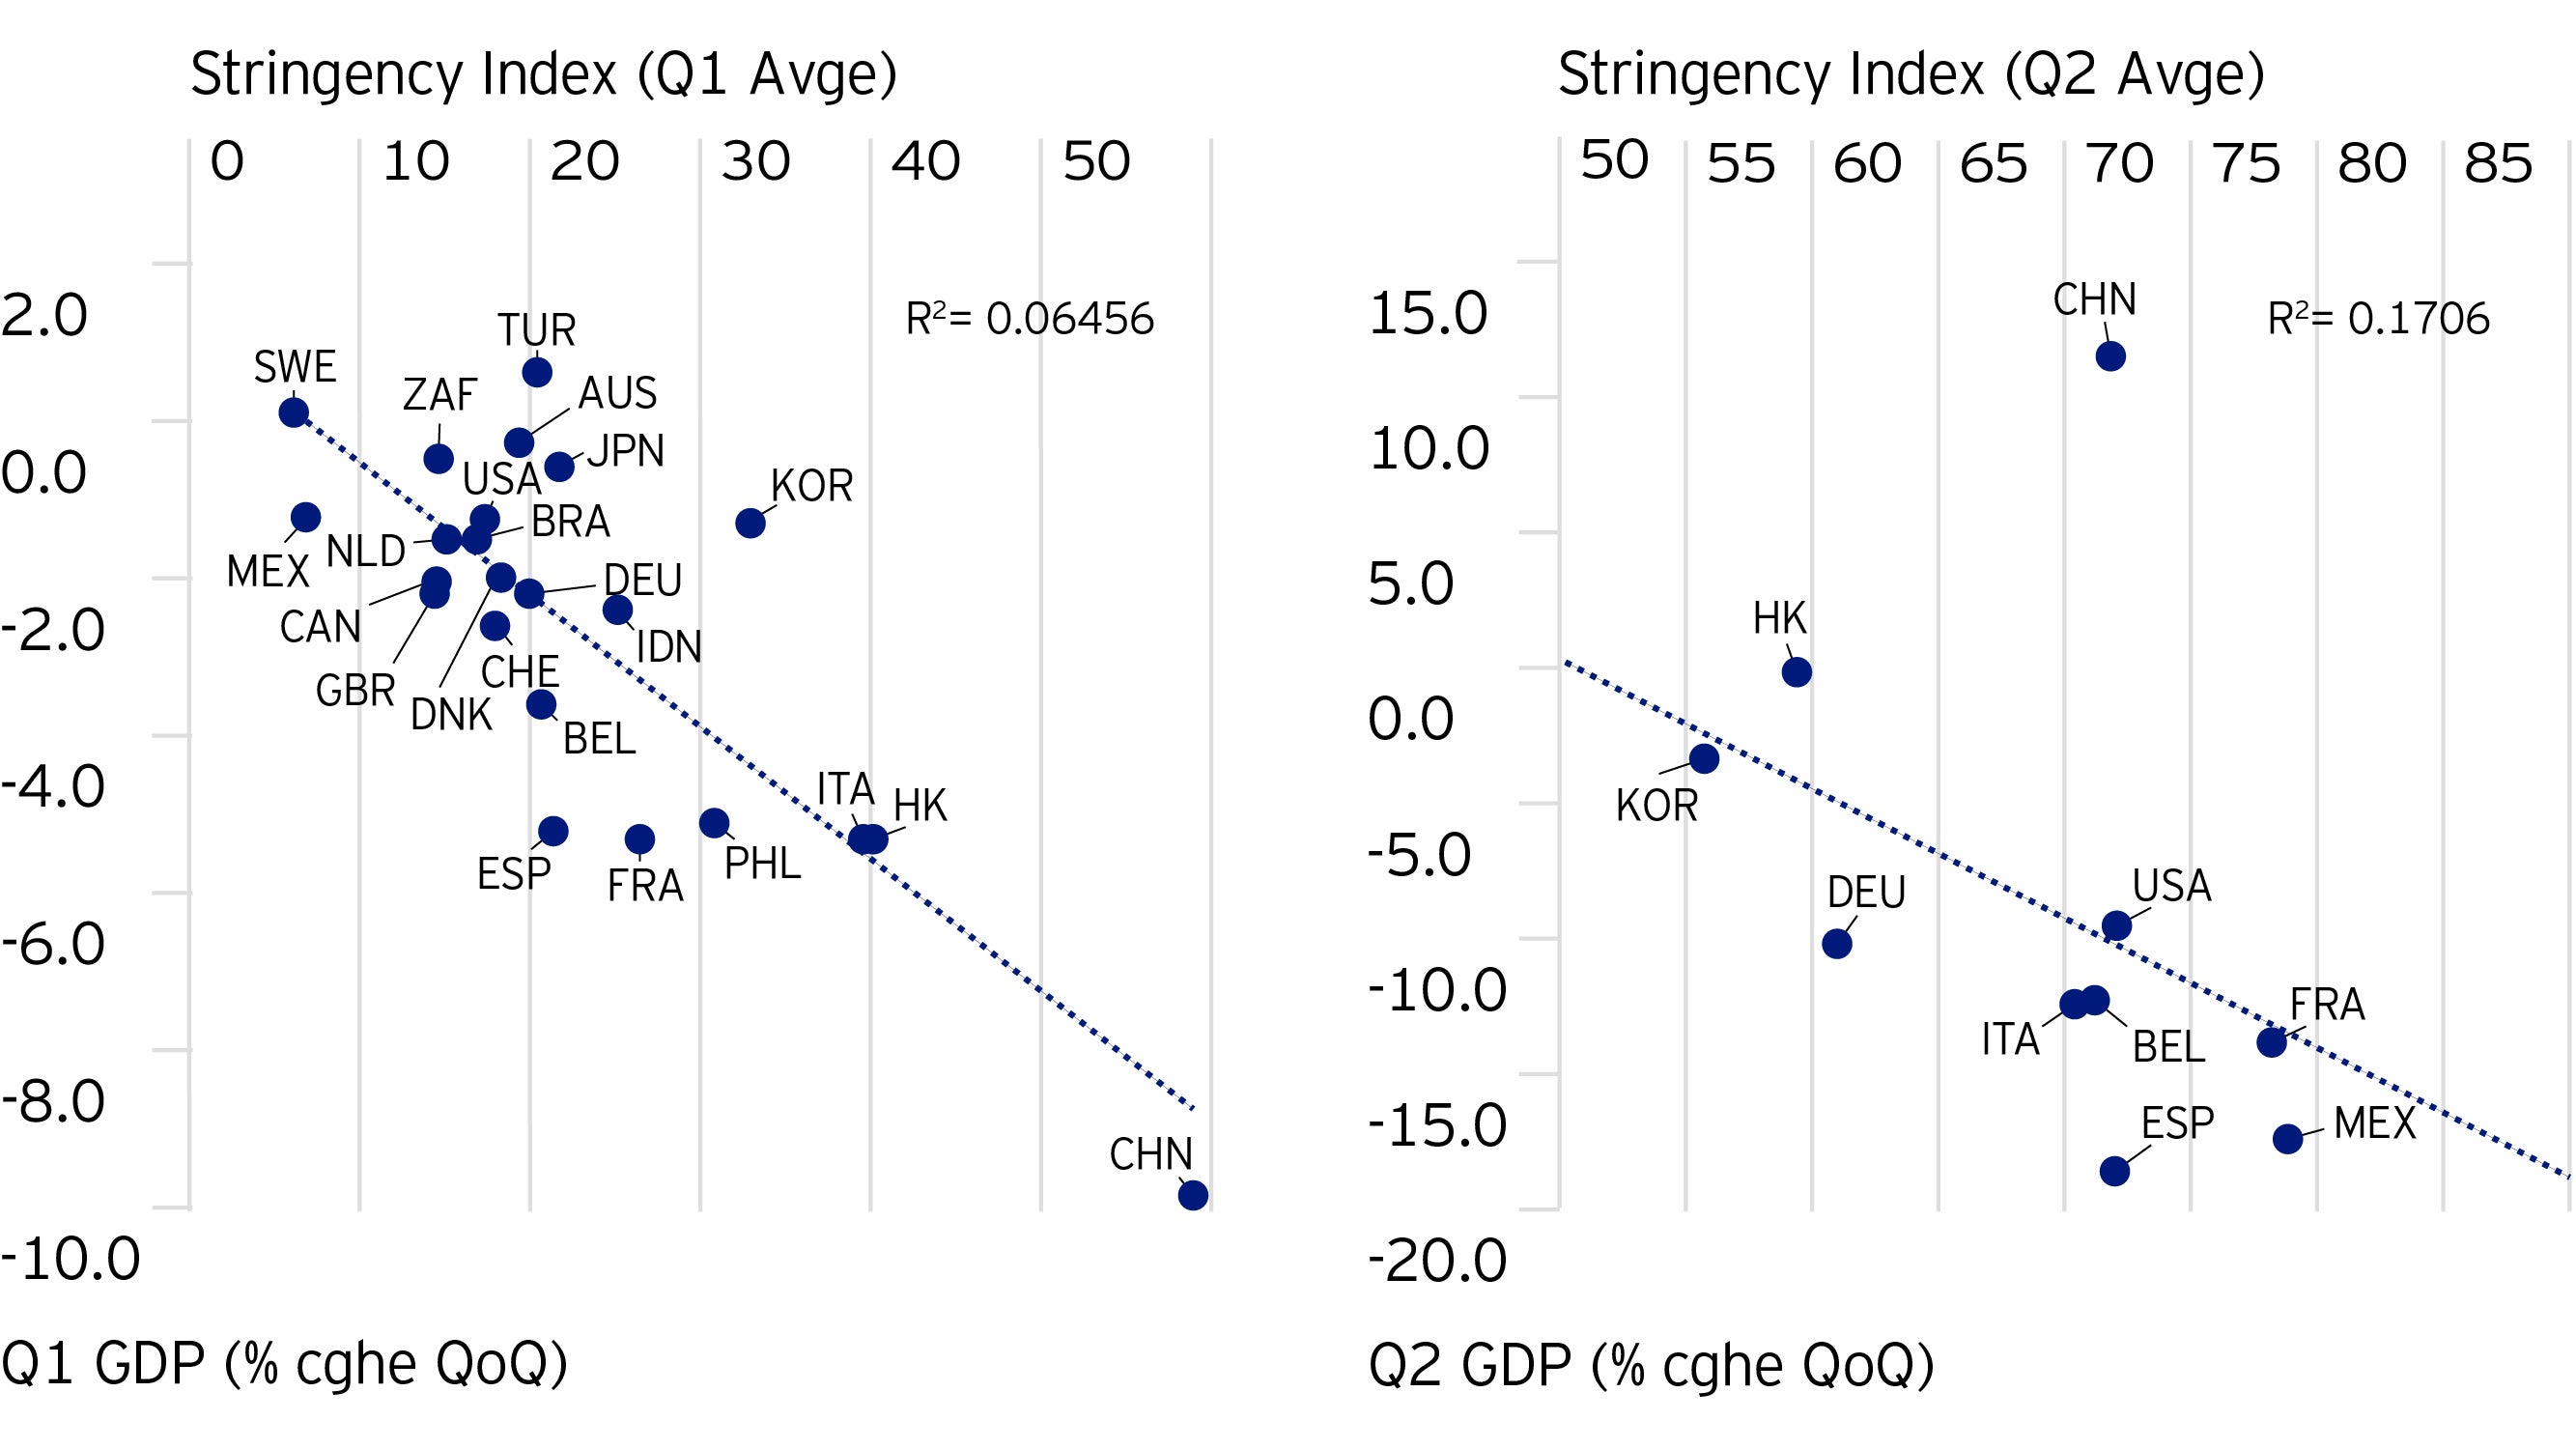  Fig 1. A Great Compression: COVID-19 lockdown stringency closely related to GDP performance 